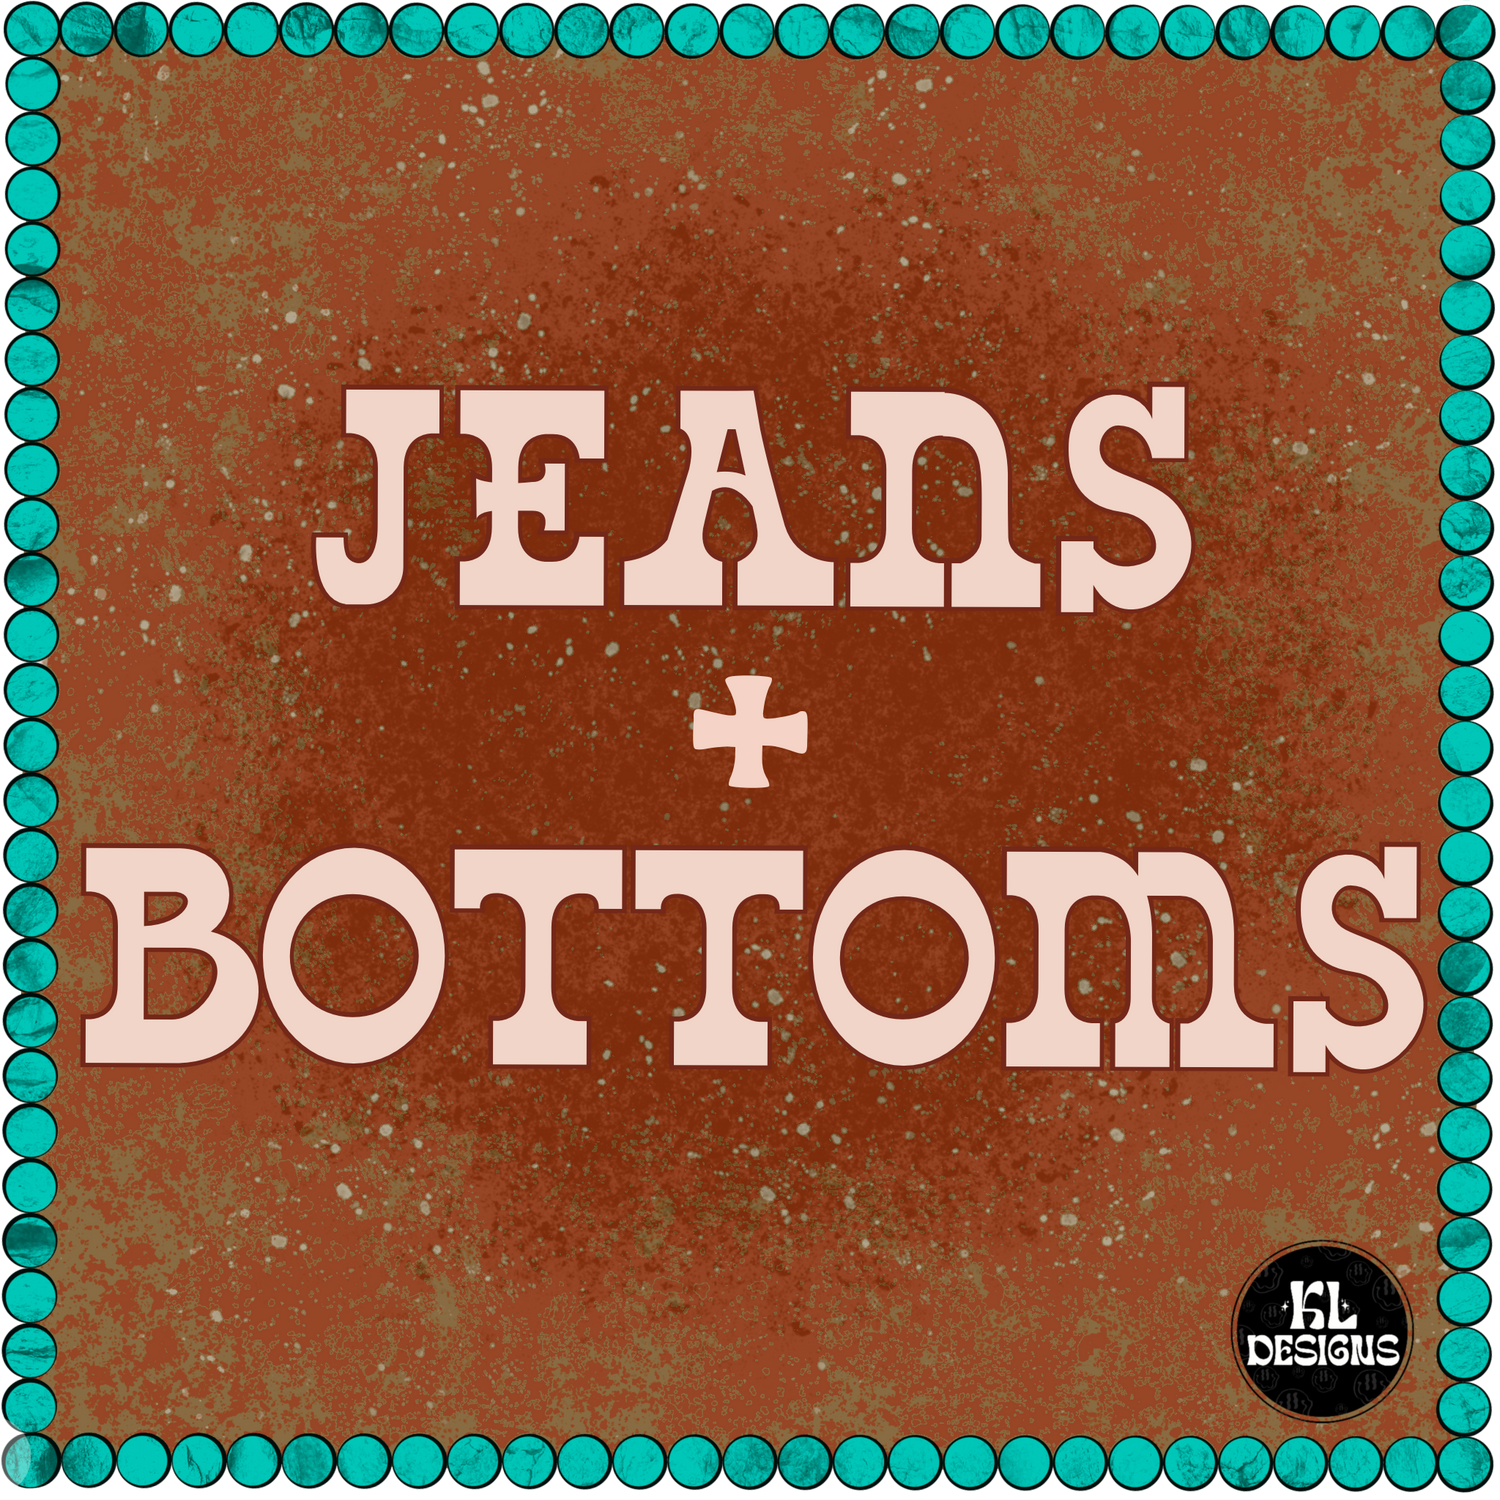 Bottoms & Jeans